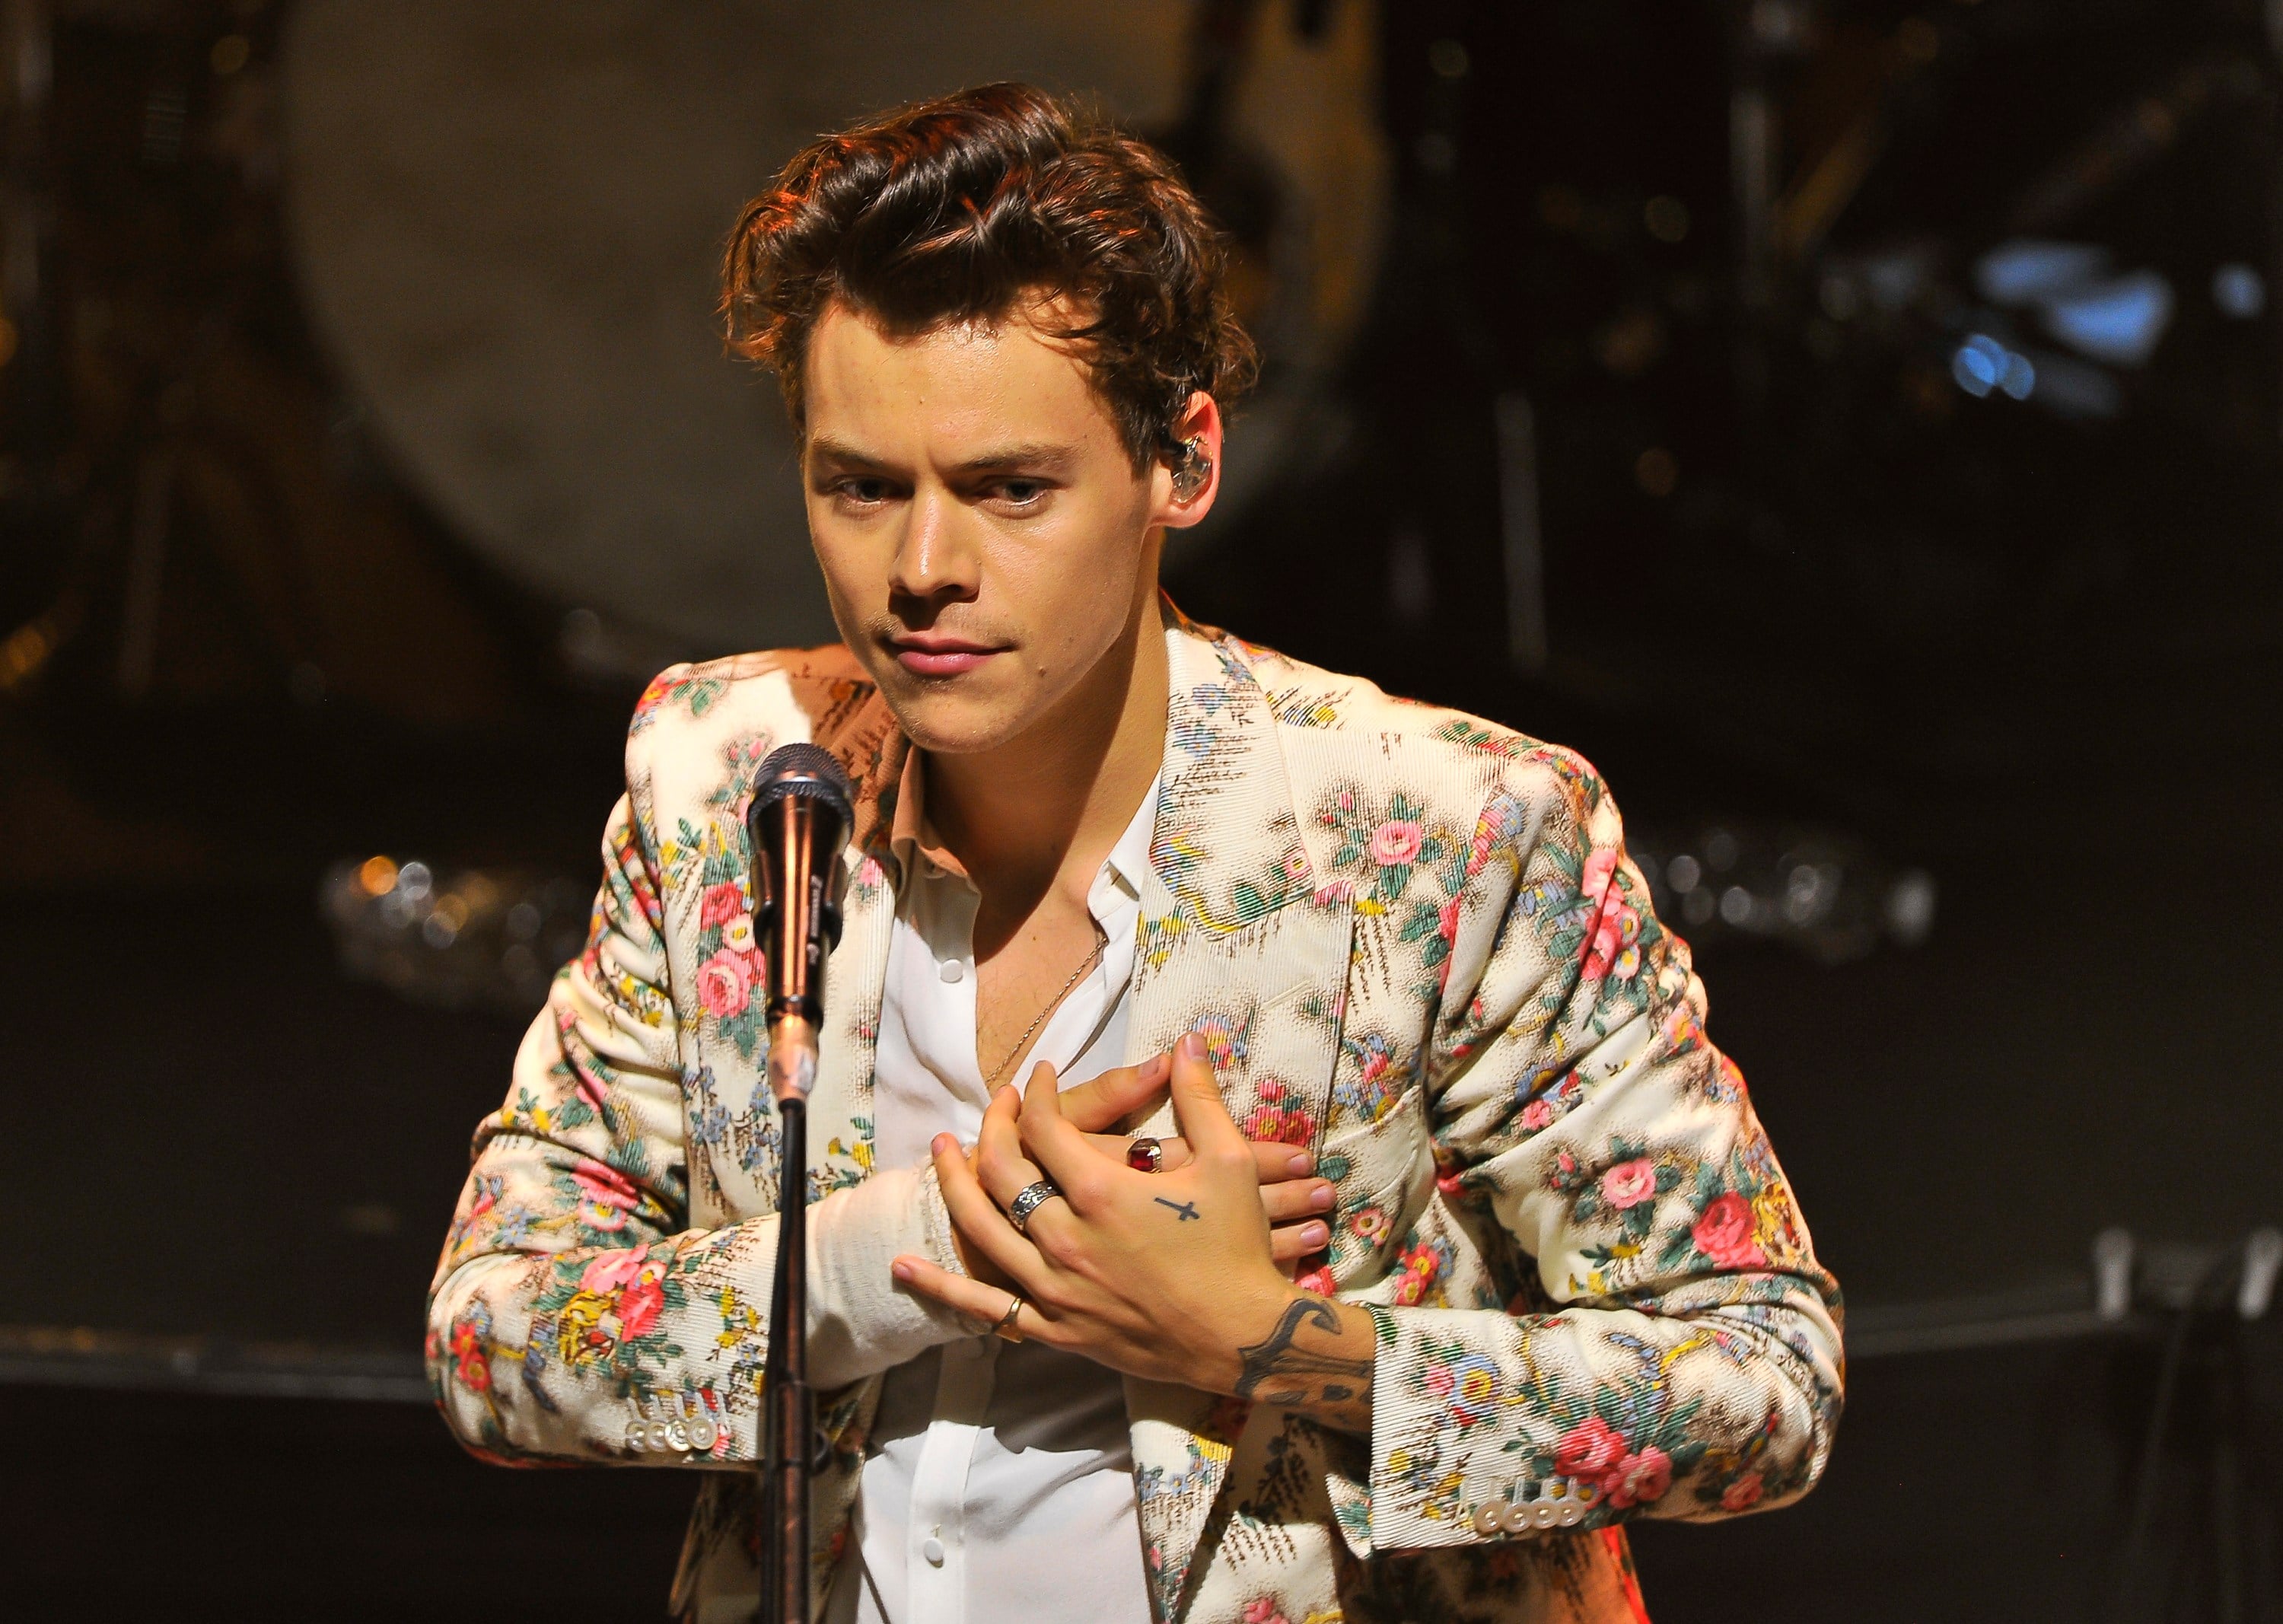 Harry Styles impresses as a solo artist as the former One